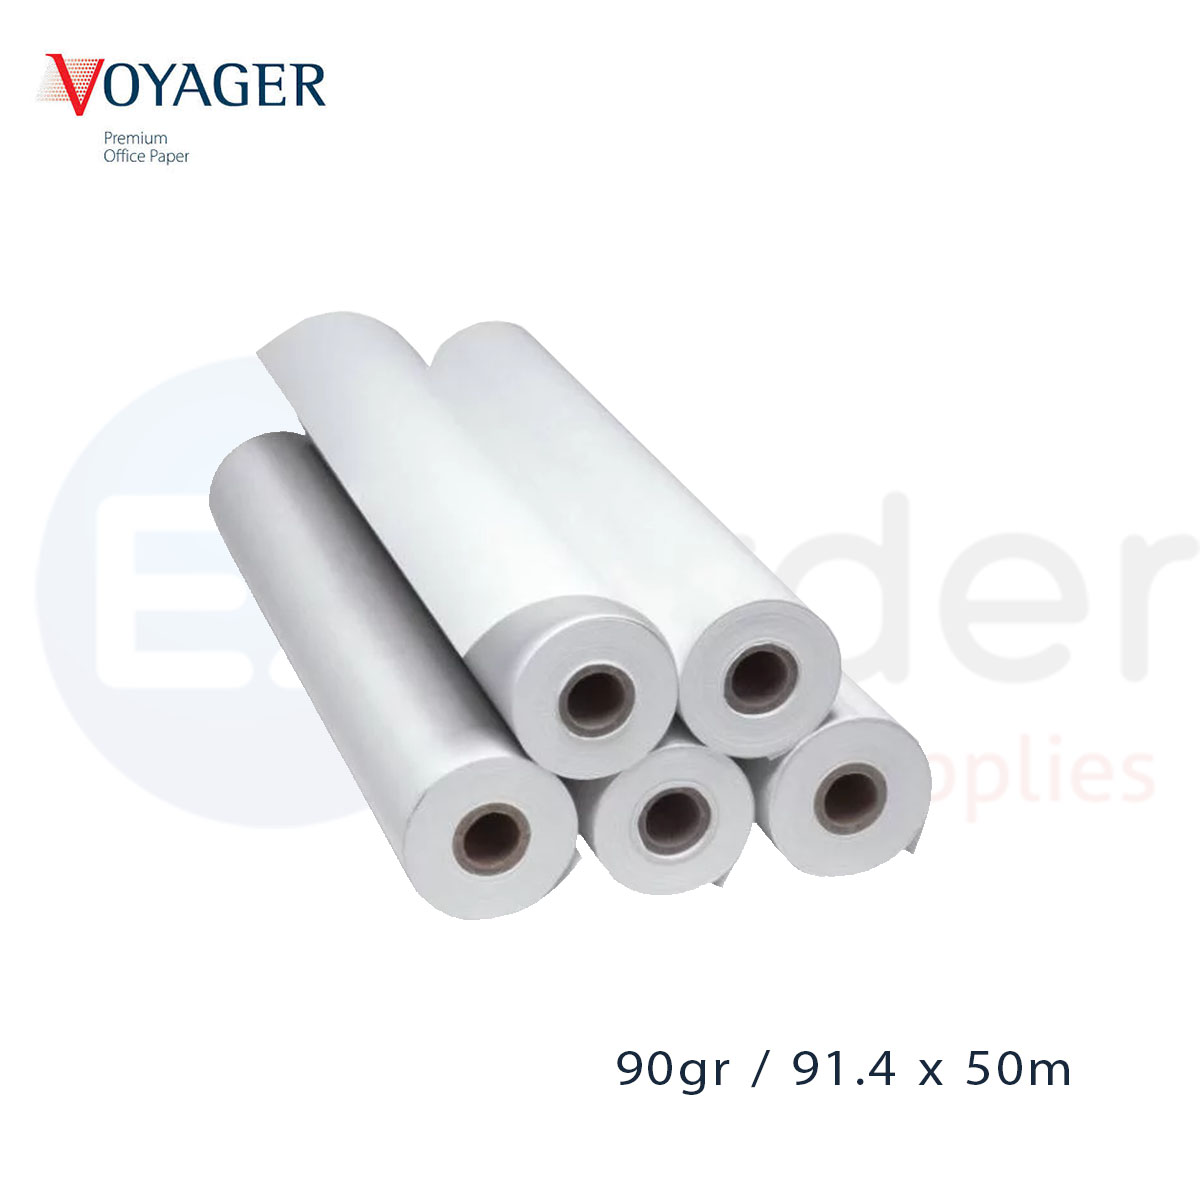 Plotter roll 90gr.(91.4X50m), A0+,  Voyager